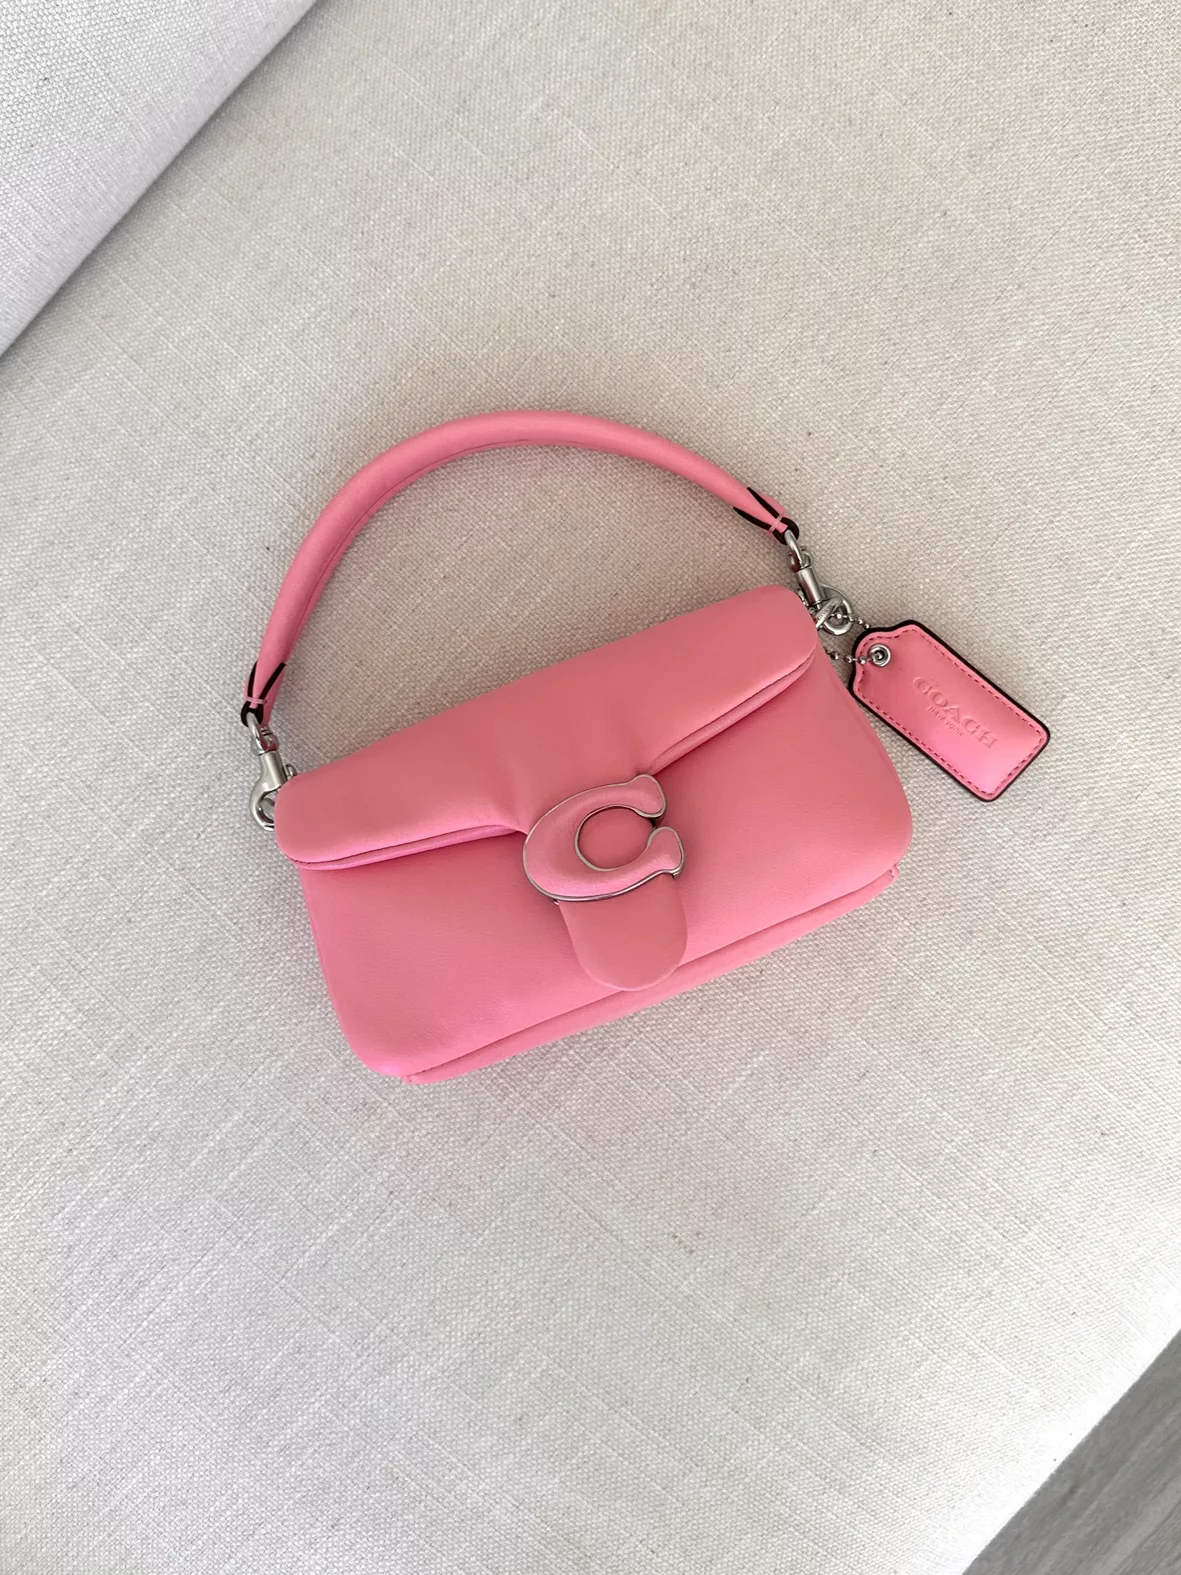 COACH Pillow Tabby Shoulder Bag 18 in Pink